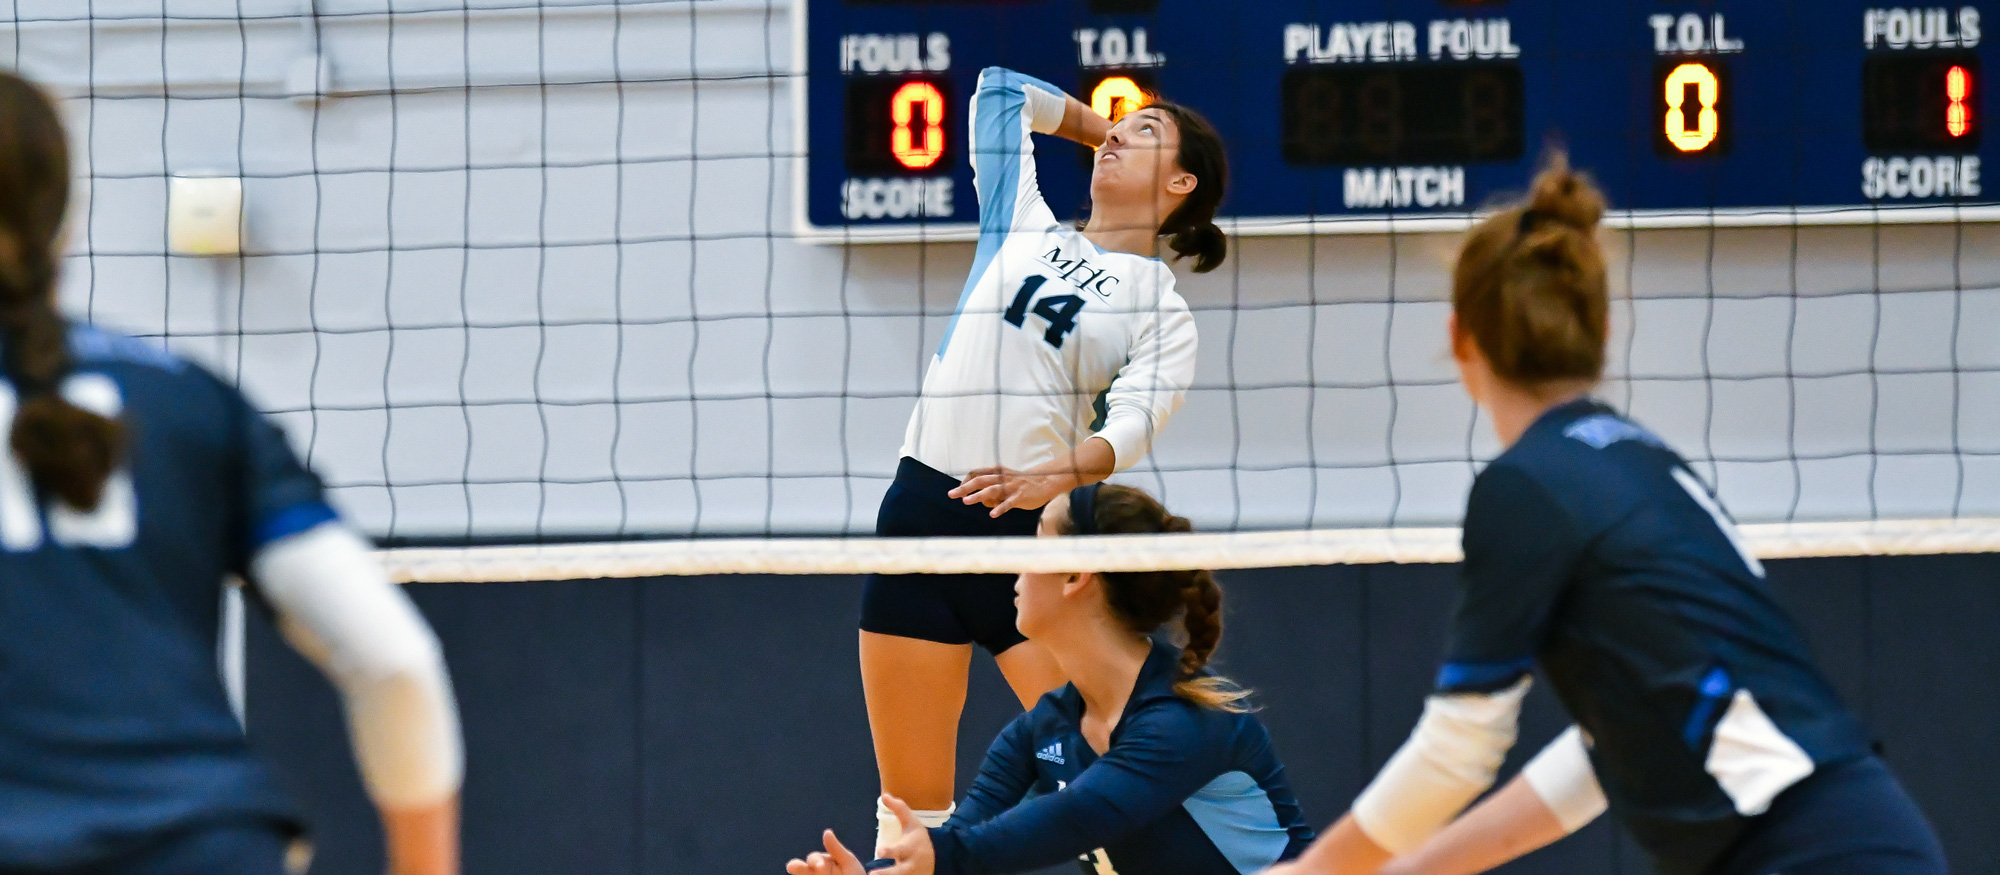 Mar Simon tied a career-high with 17 kills in Mount Holyoke's 3-0 win over Bay Path University on Sept. 23, 2022. (RJB Sports file photo)